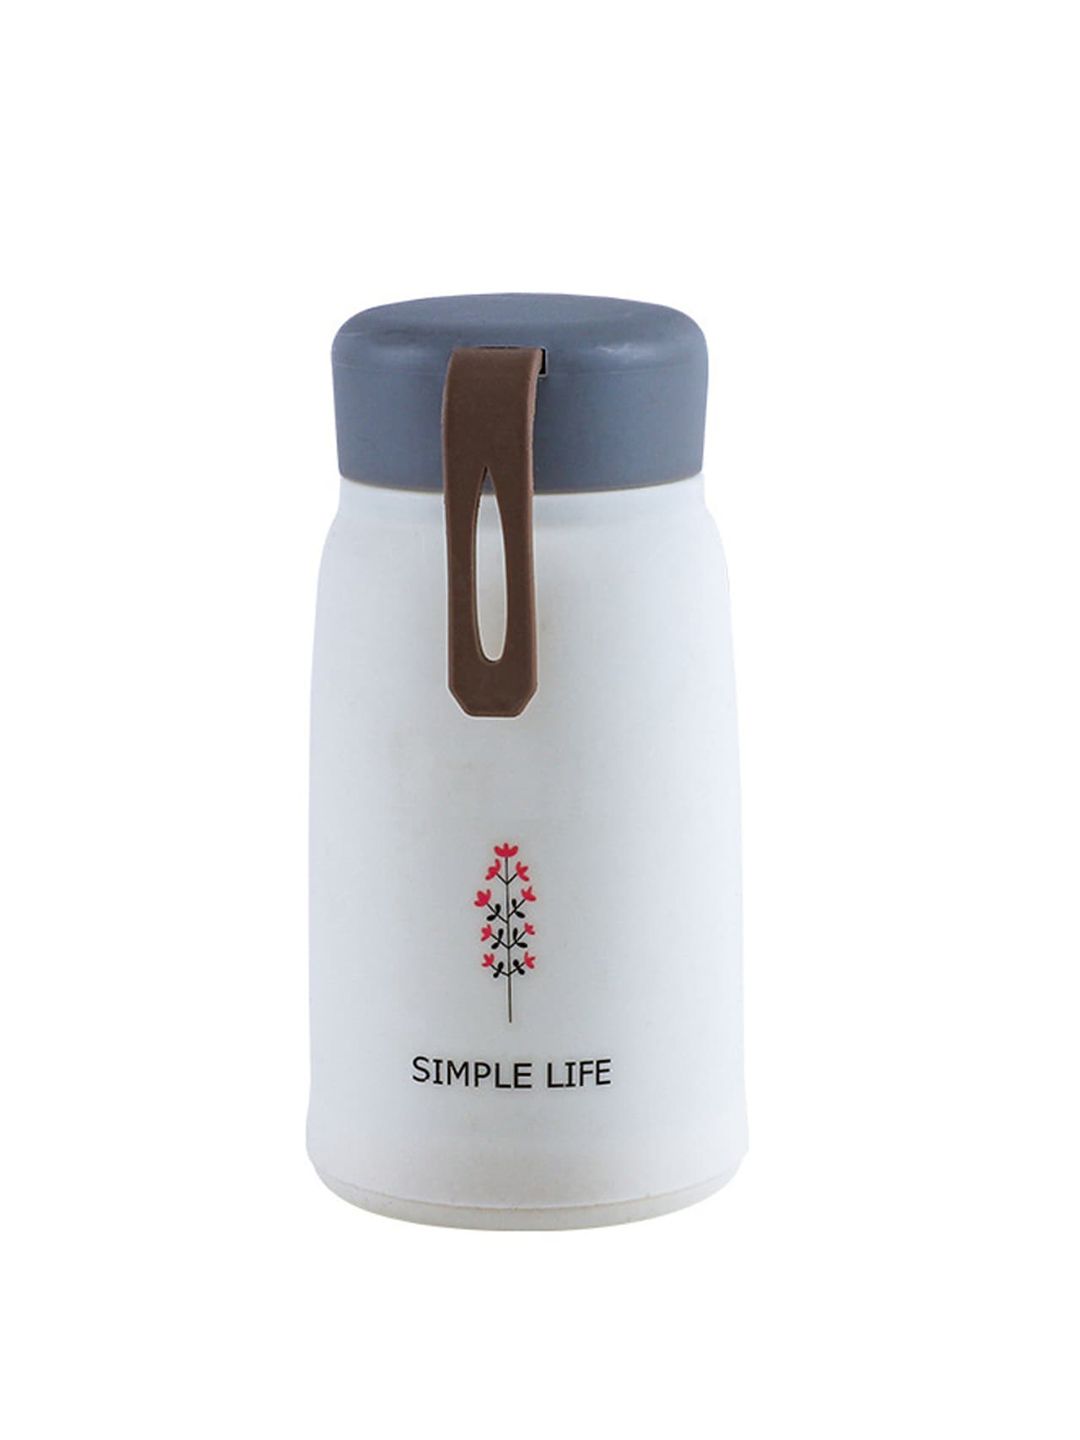 iSWEVEN Unisex White & Grey Printed Stainless Steel Water Bottle 380 ml Price in India